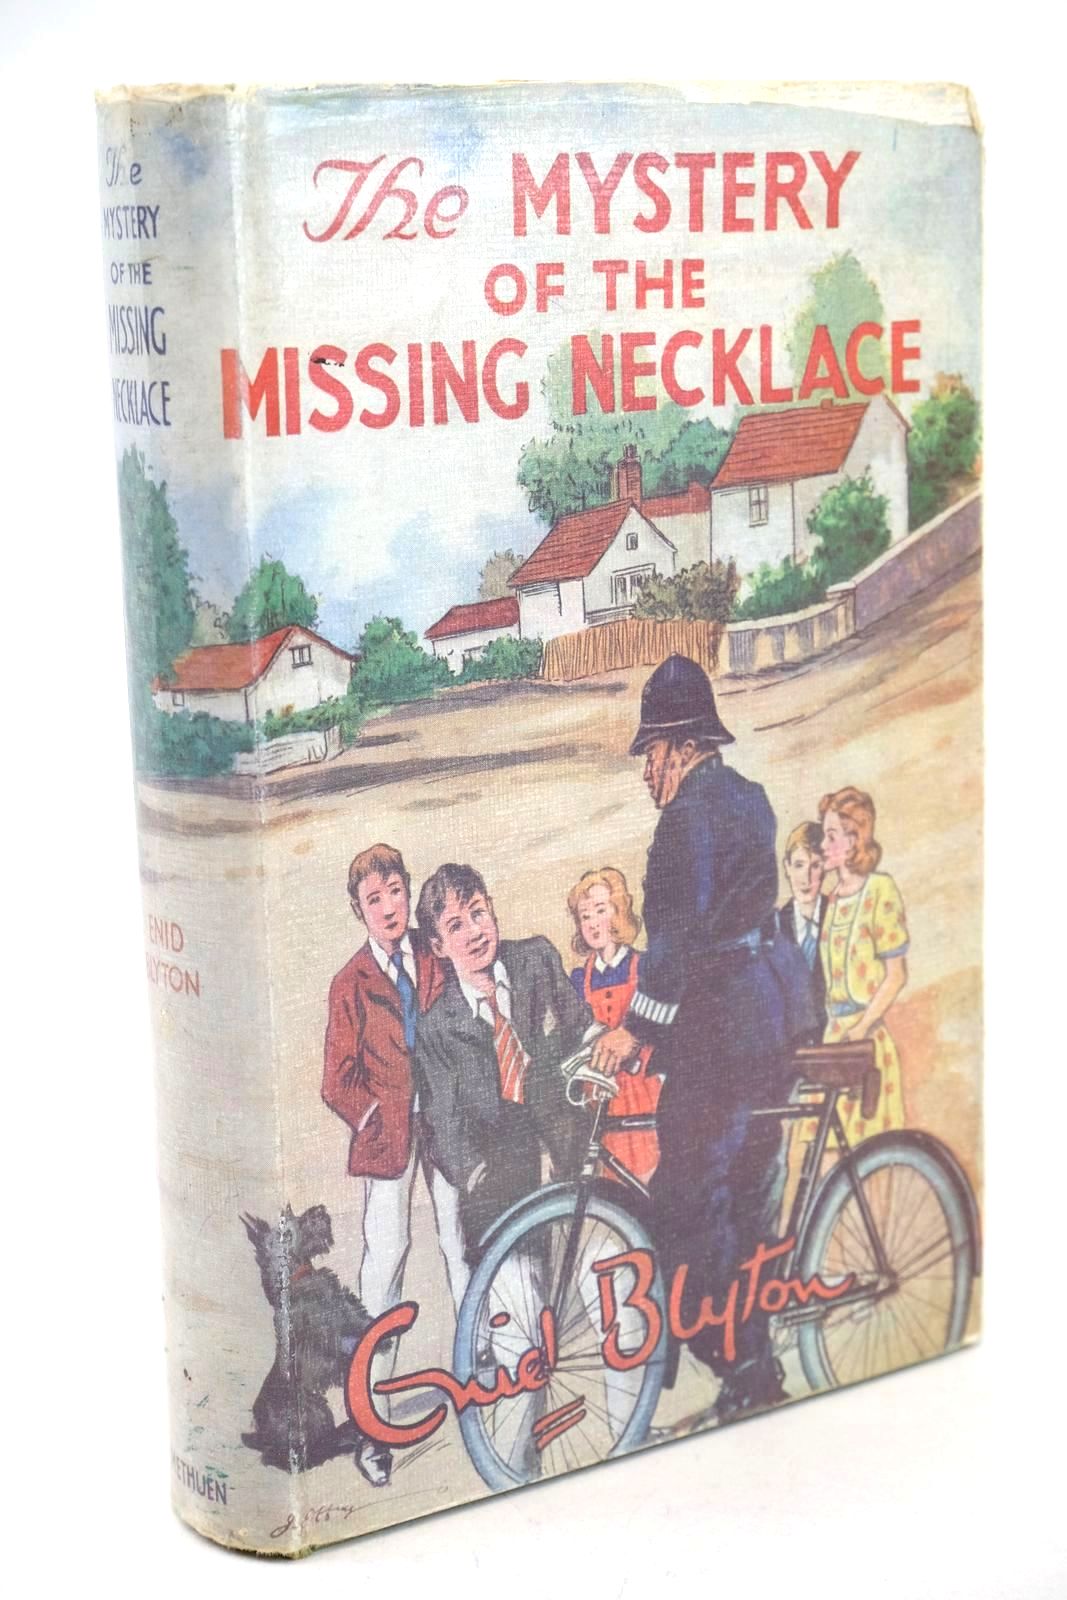 Photo of THE MYSTERY OF THE MISSING NECKLACE written by Blyton, Enid illustrated by Abbey, J. published by Methuen &amp; Co. Ltd. (STOCK CODE: 1326914)  for sale by Stella & Rose's Books